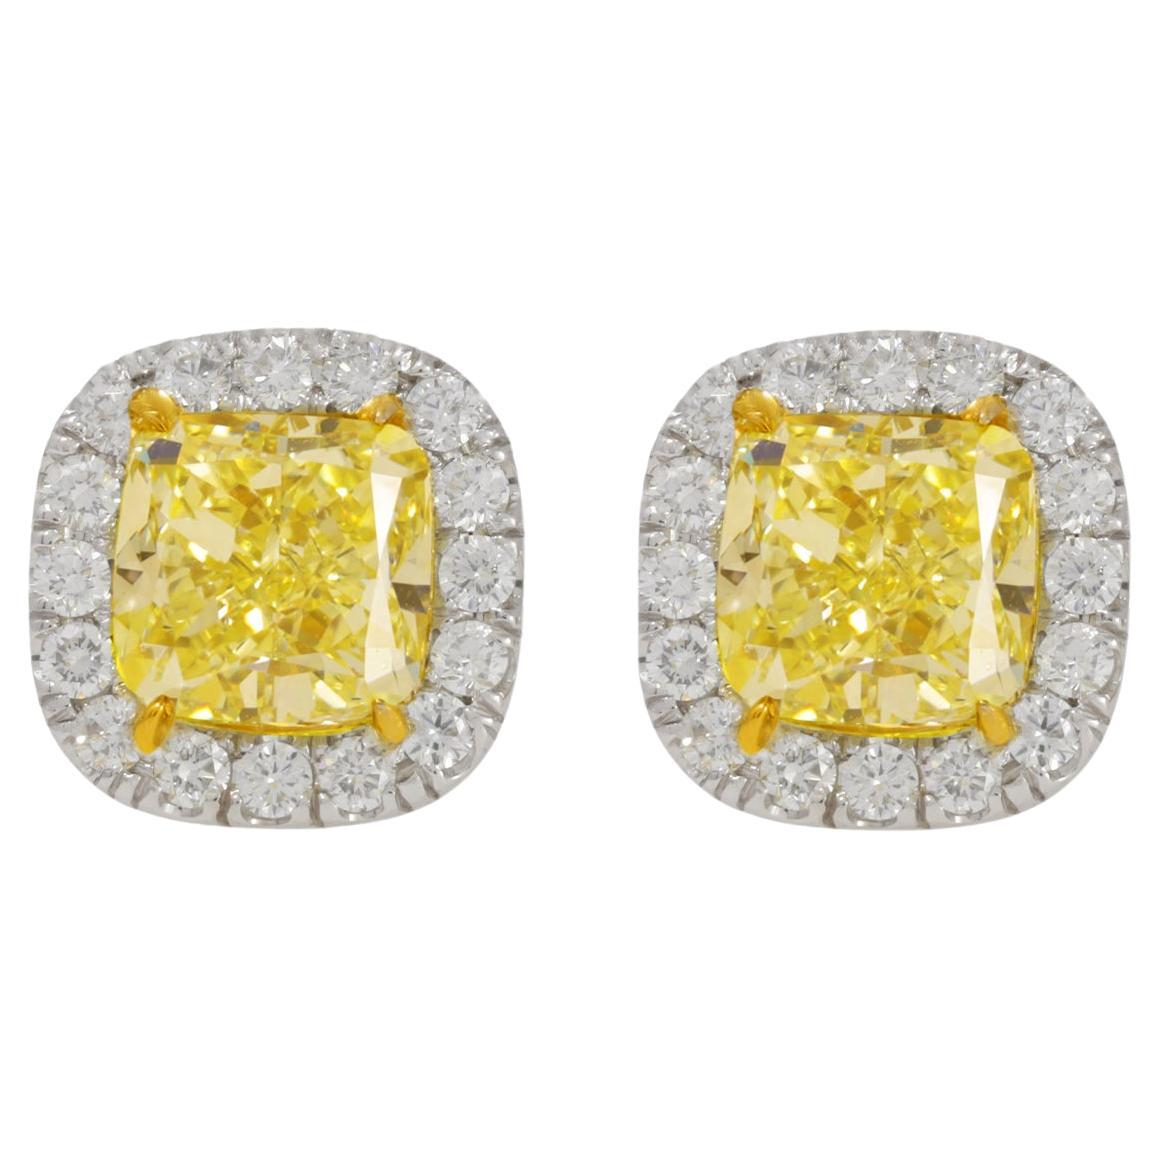 Diana M. 18KT WHITE GOLD DIAMOND STUDS, FEATURES 3cts Fancy yellow diamonds  For Sale